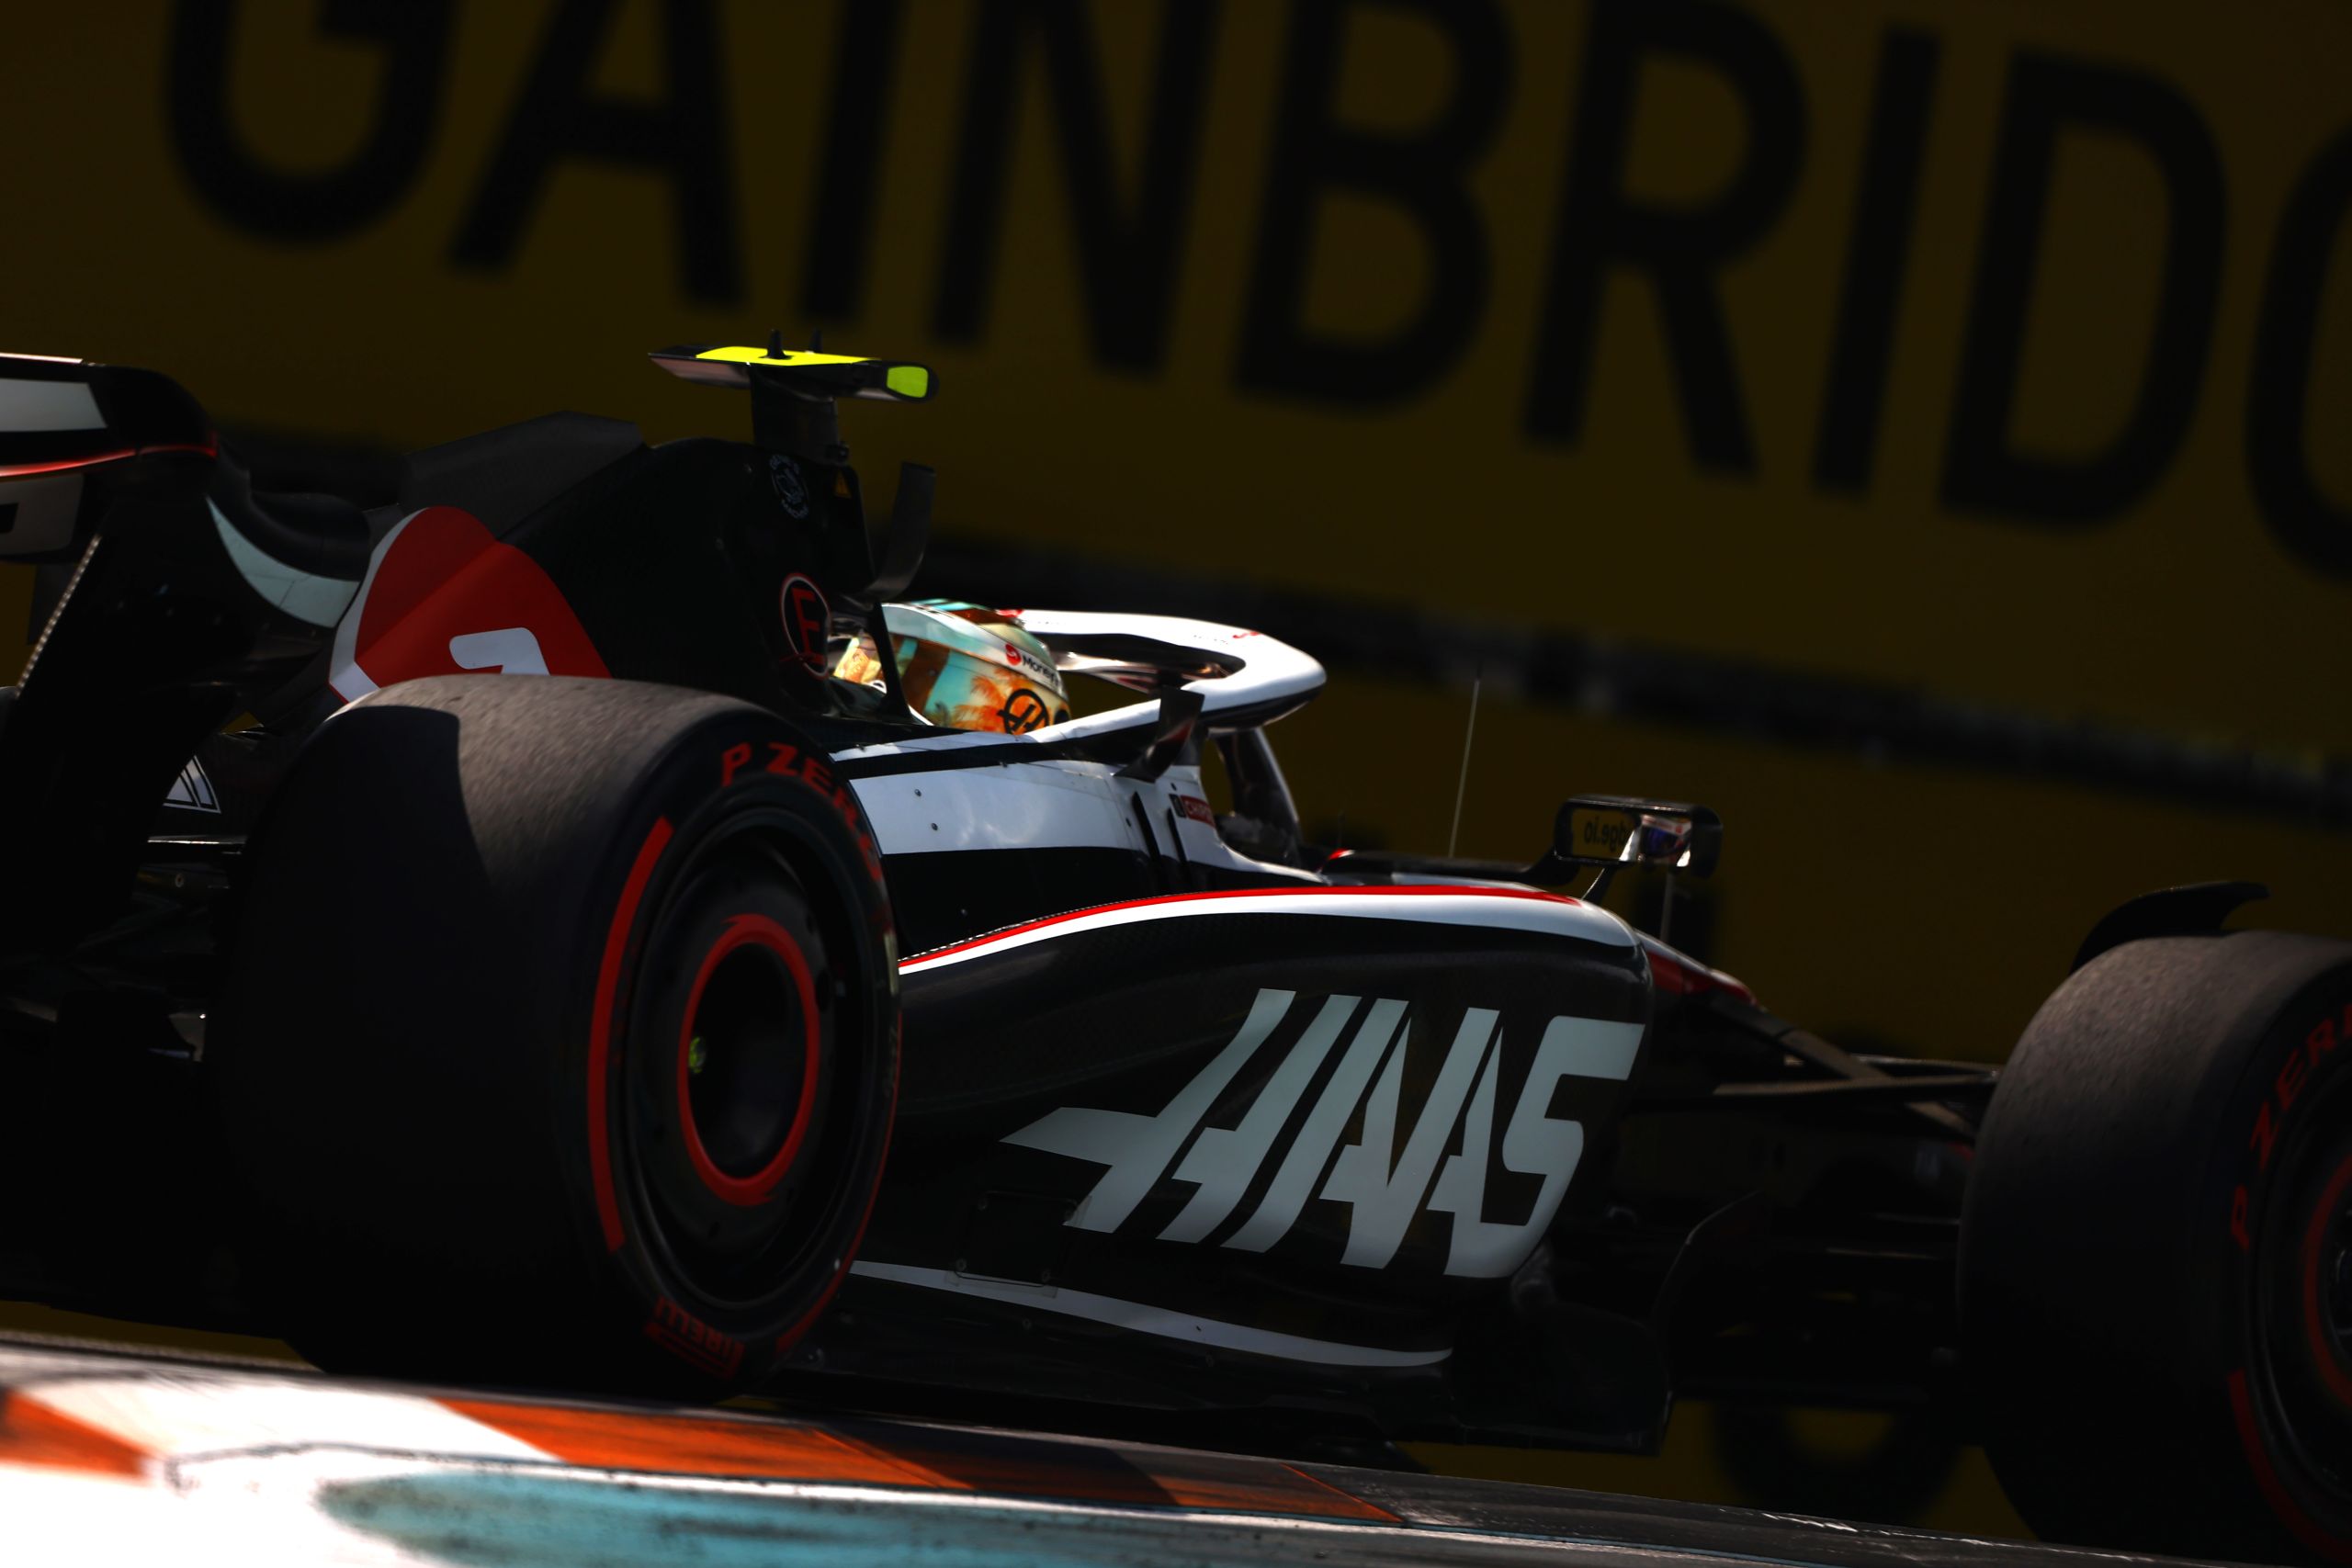 MIAMI INTERNATIONAL AUTODROME, UNITED STATES OF AMERICA - MAY 06: Nico Hulkenberg, Haas VF-23 during the Miami GP at Miami International Autodrome on Saturday May 06, 2023 in Miami, United States of America. (Photo by Andy Hone / LAT Images)